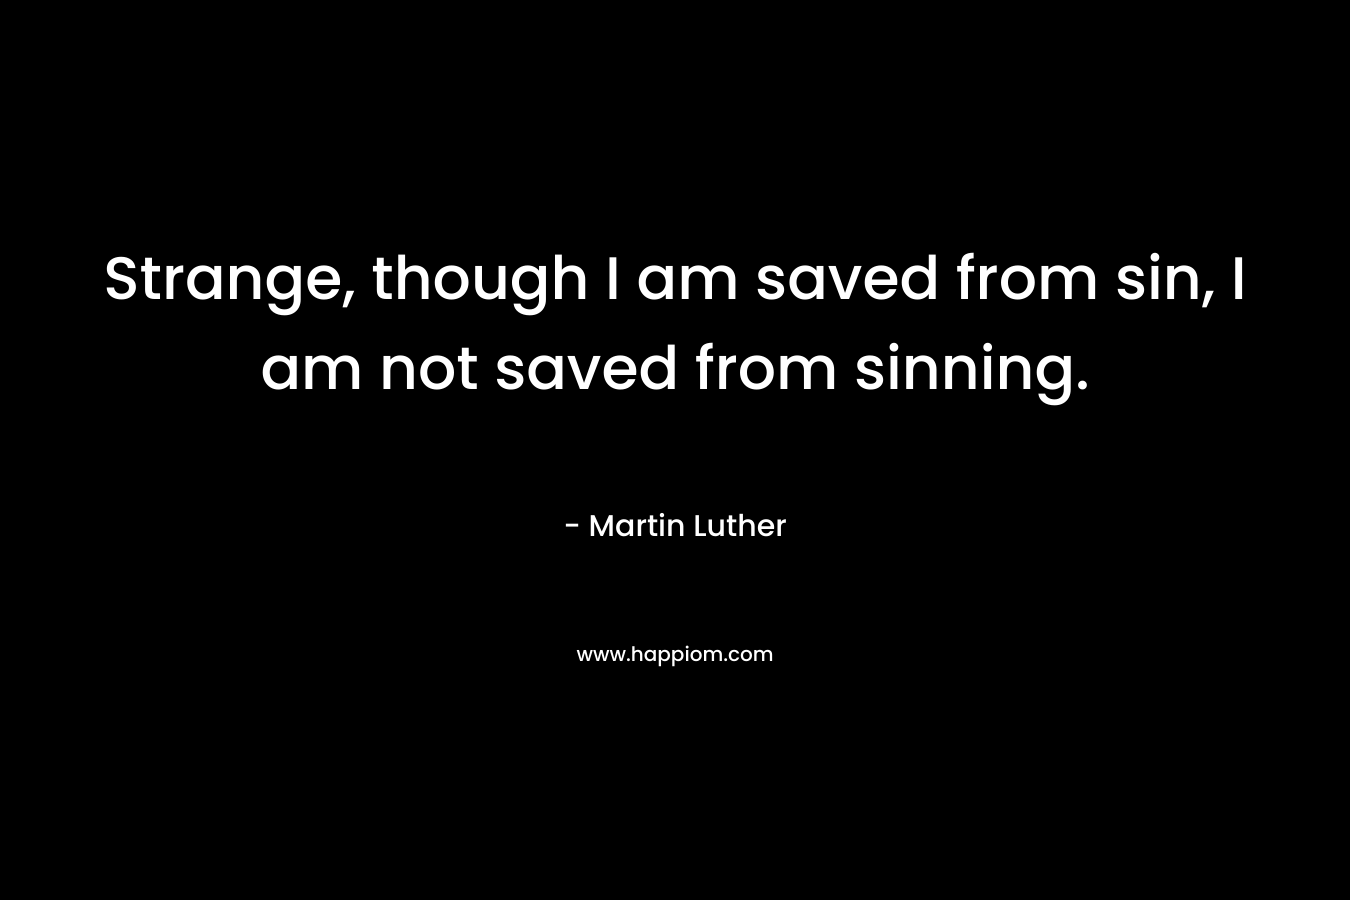 Strange, though I am saved from sin, I am not saved from sinning. – Martin Luther